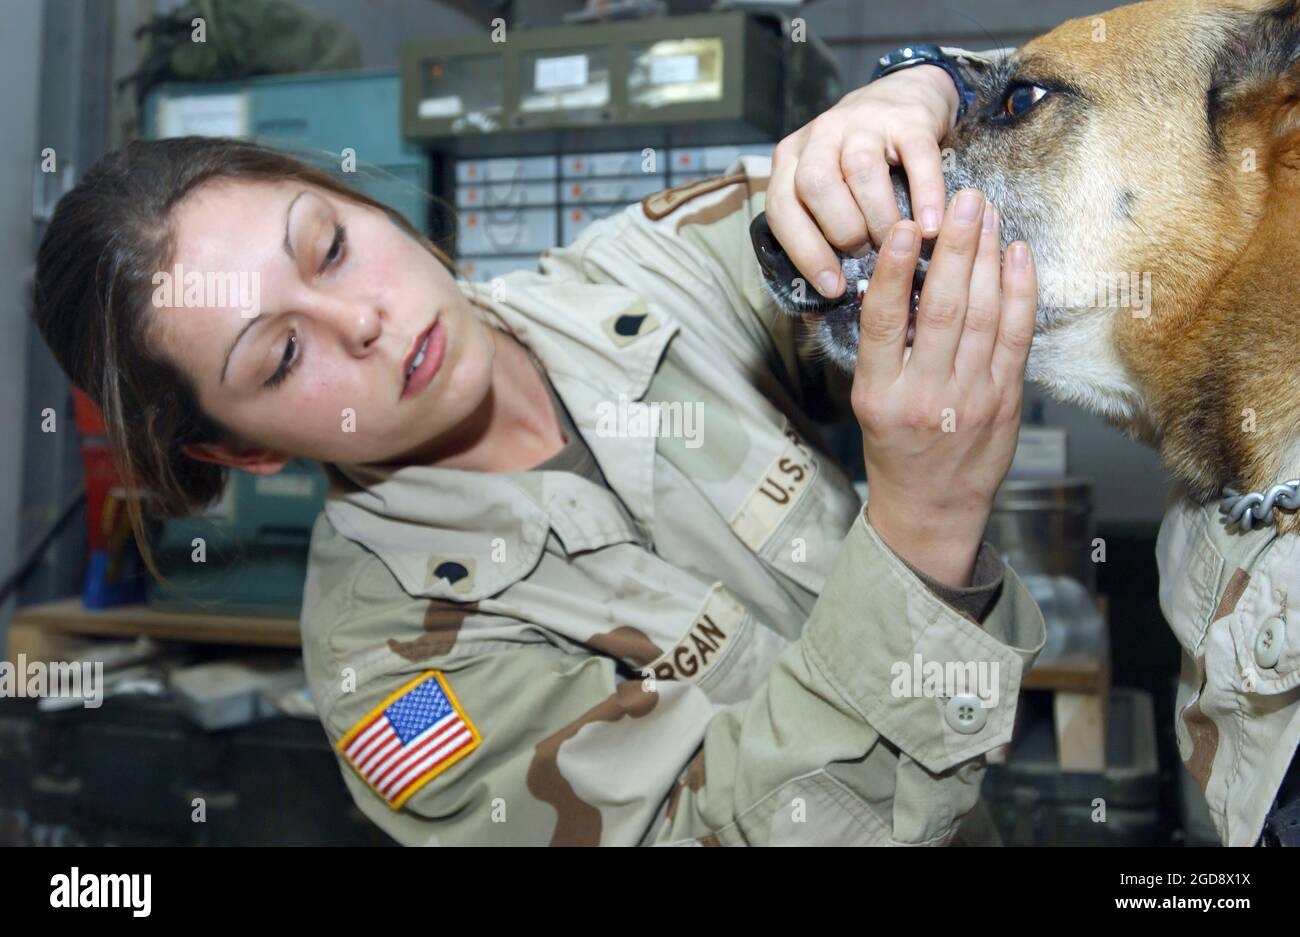 US Army (USA) Specialist (SPC) Destiny Morgan, a Veterinary technician performs a periodic check-up on Falla, a US Air Force (USAF) Military Working Dog, at Tallil Air Base (AB), Iraq, in support of Operations IRAQI FREEDOM.  (USAF PHOTO BY SSGT CHENZIRA MALLORY 040116-F-1545M-004) Stock Photo